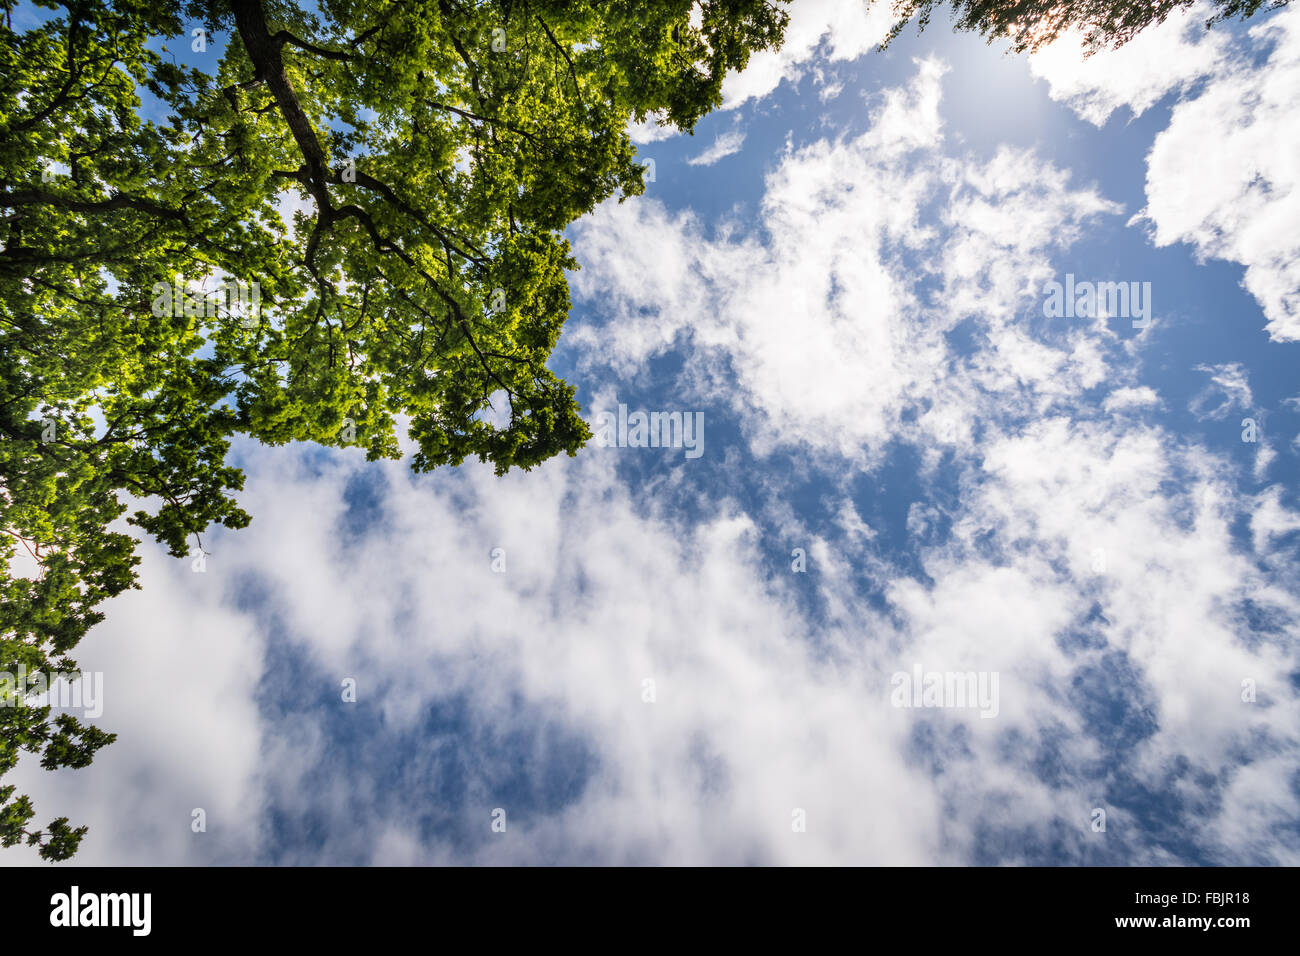 Stunning blue sky with dramatic clouds and green trees. Stock Photo